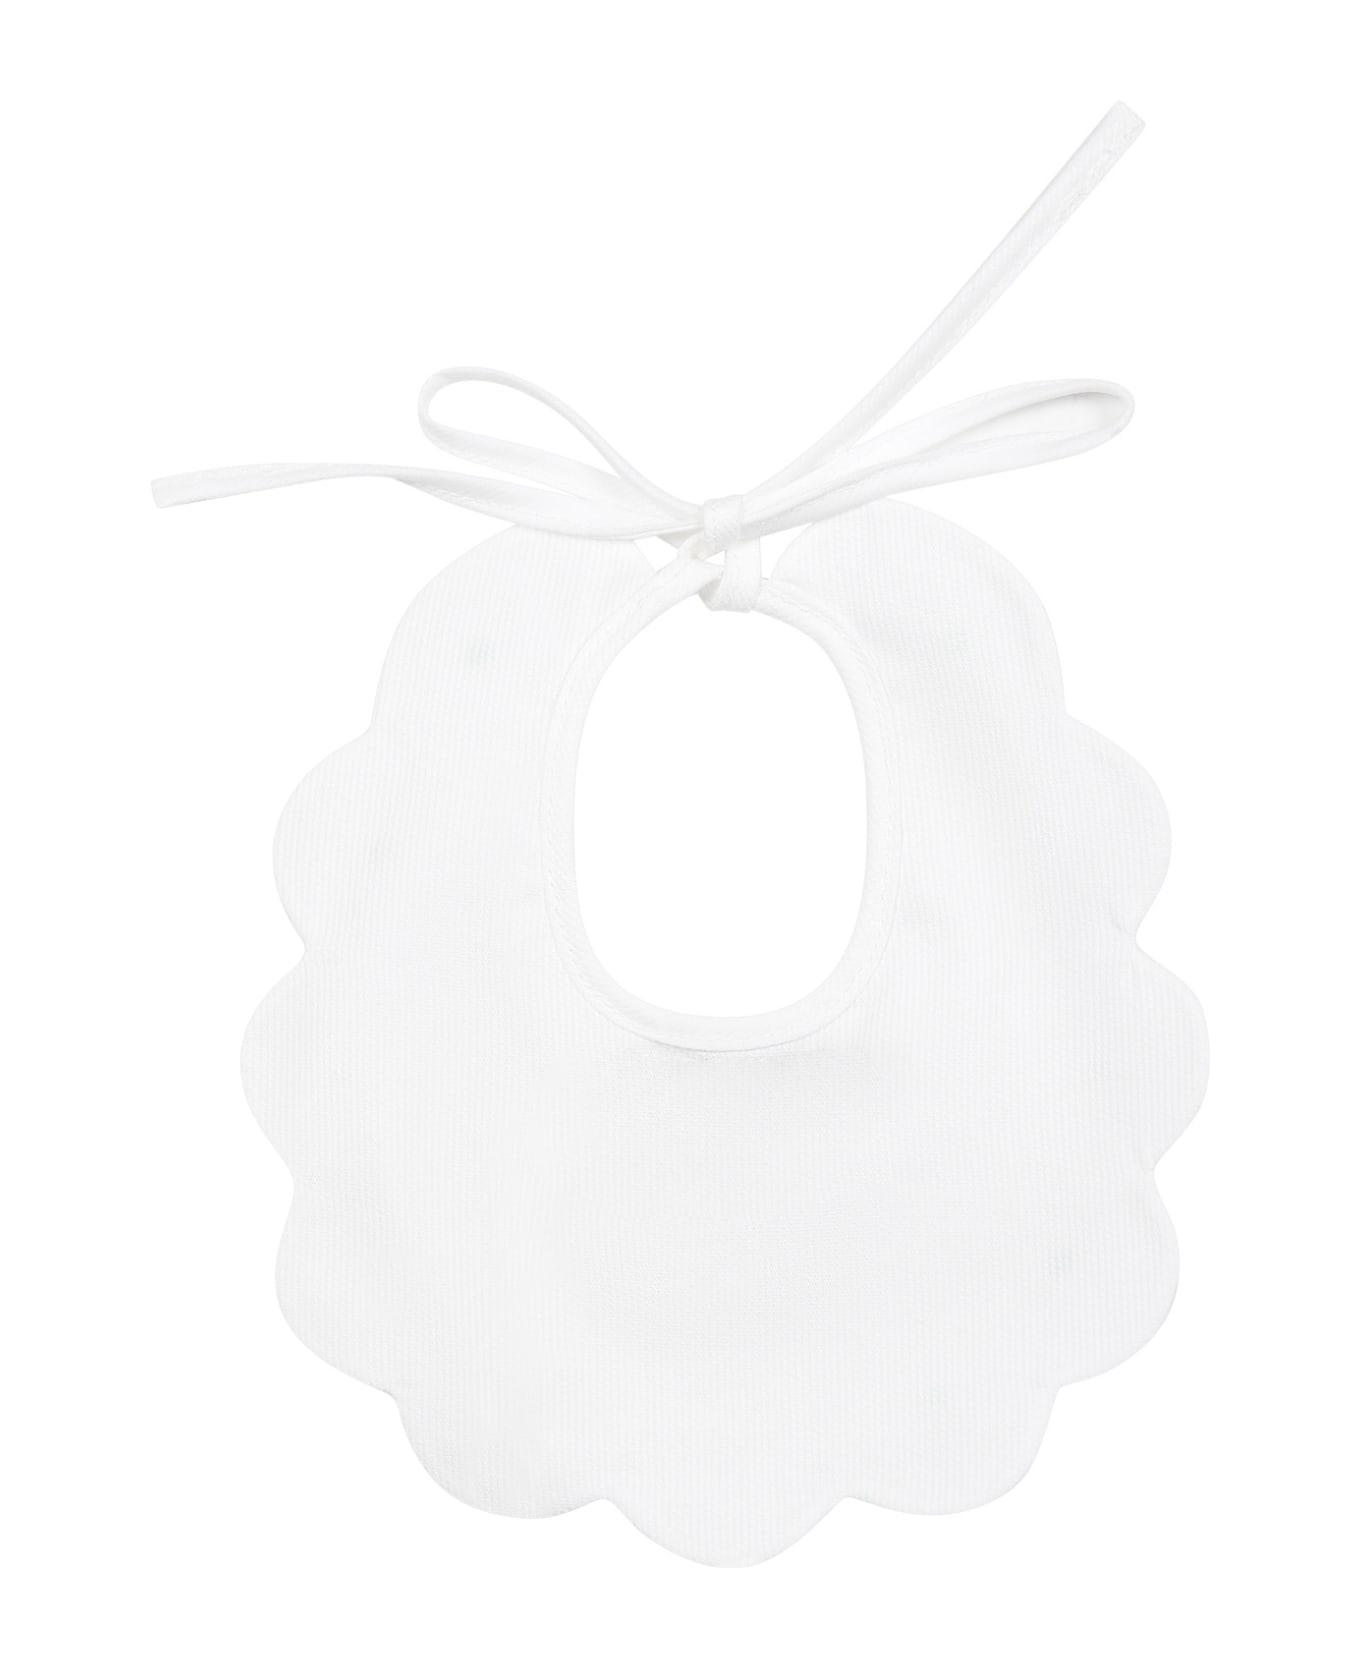 Little Bear White Bib For Baby Kids With Polka Dots - White アクセサリー＆ギフト